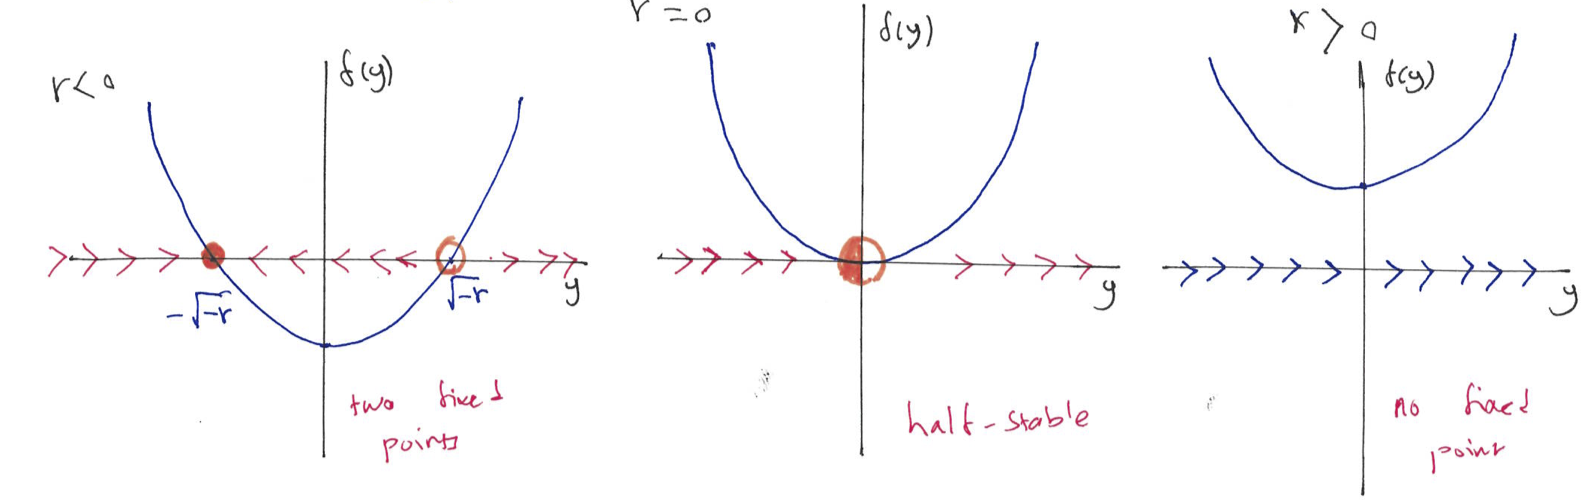 The plot of $f(y)$ vs $y$ for different values of $r$, illustrates the vector field and the stability of the fixed point for saddle-node bifurcation.